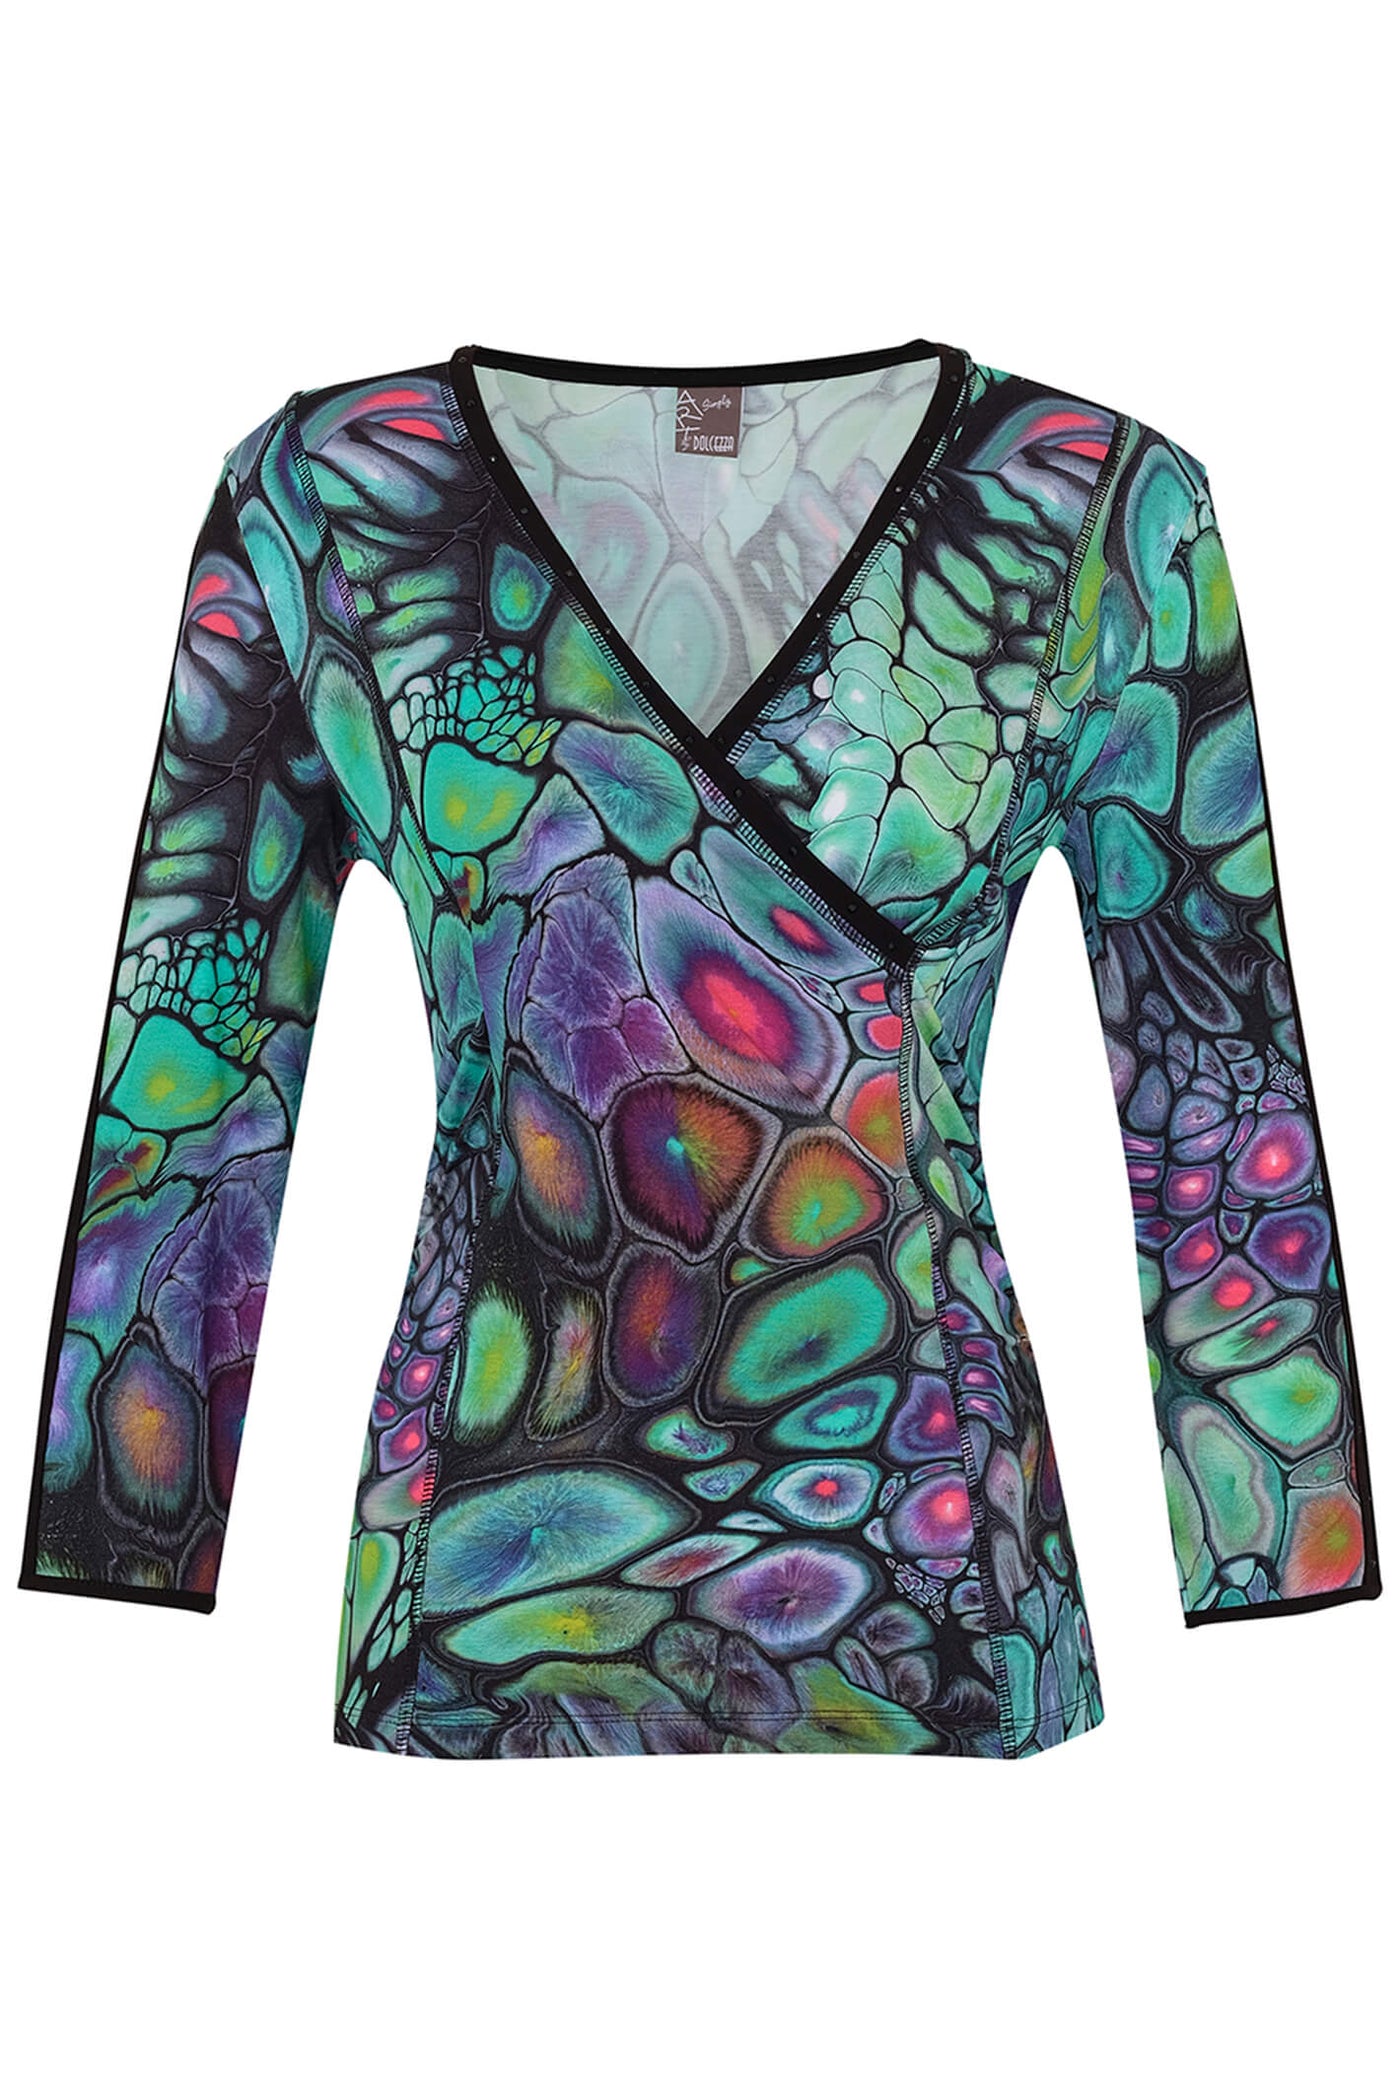 Dolcezza 73661 Green Fantasy Print Wrap Style Top - Rouge Boutique